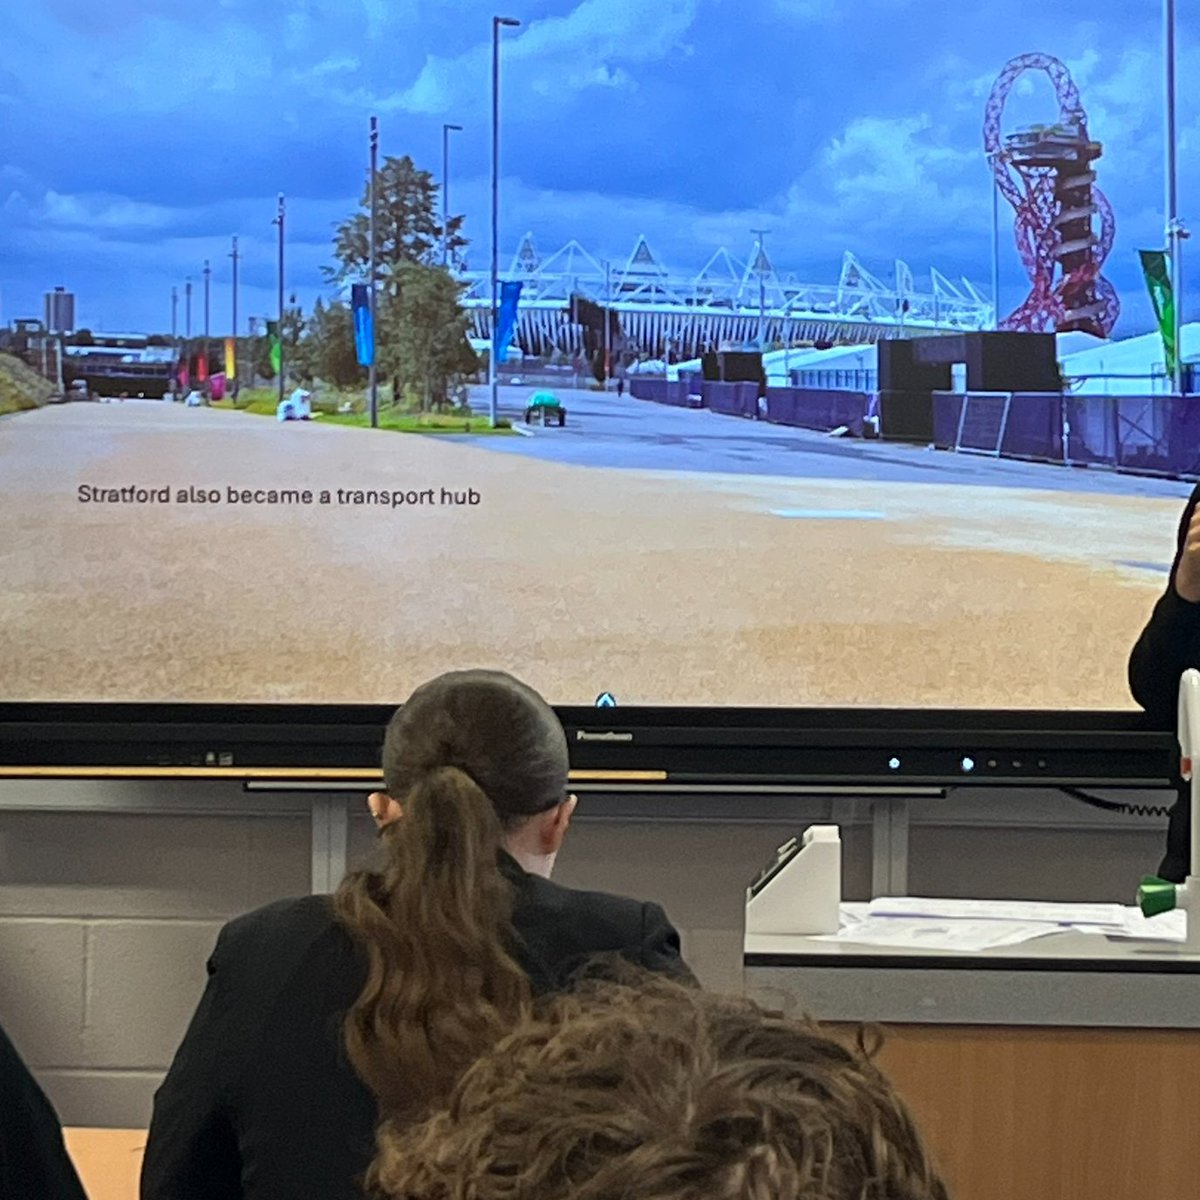 Y10 #Geography students have been presenting their findings on whether the regeneration of #Stratford was worth the cost. Drop your thoughts in the comments ⬇️ #explore #dream #discover #lewisham #deptford🚅🚄🚂